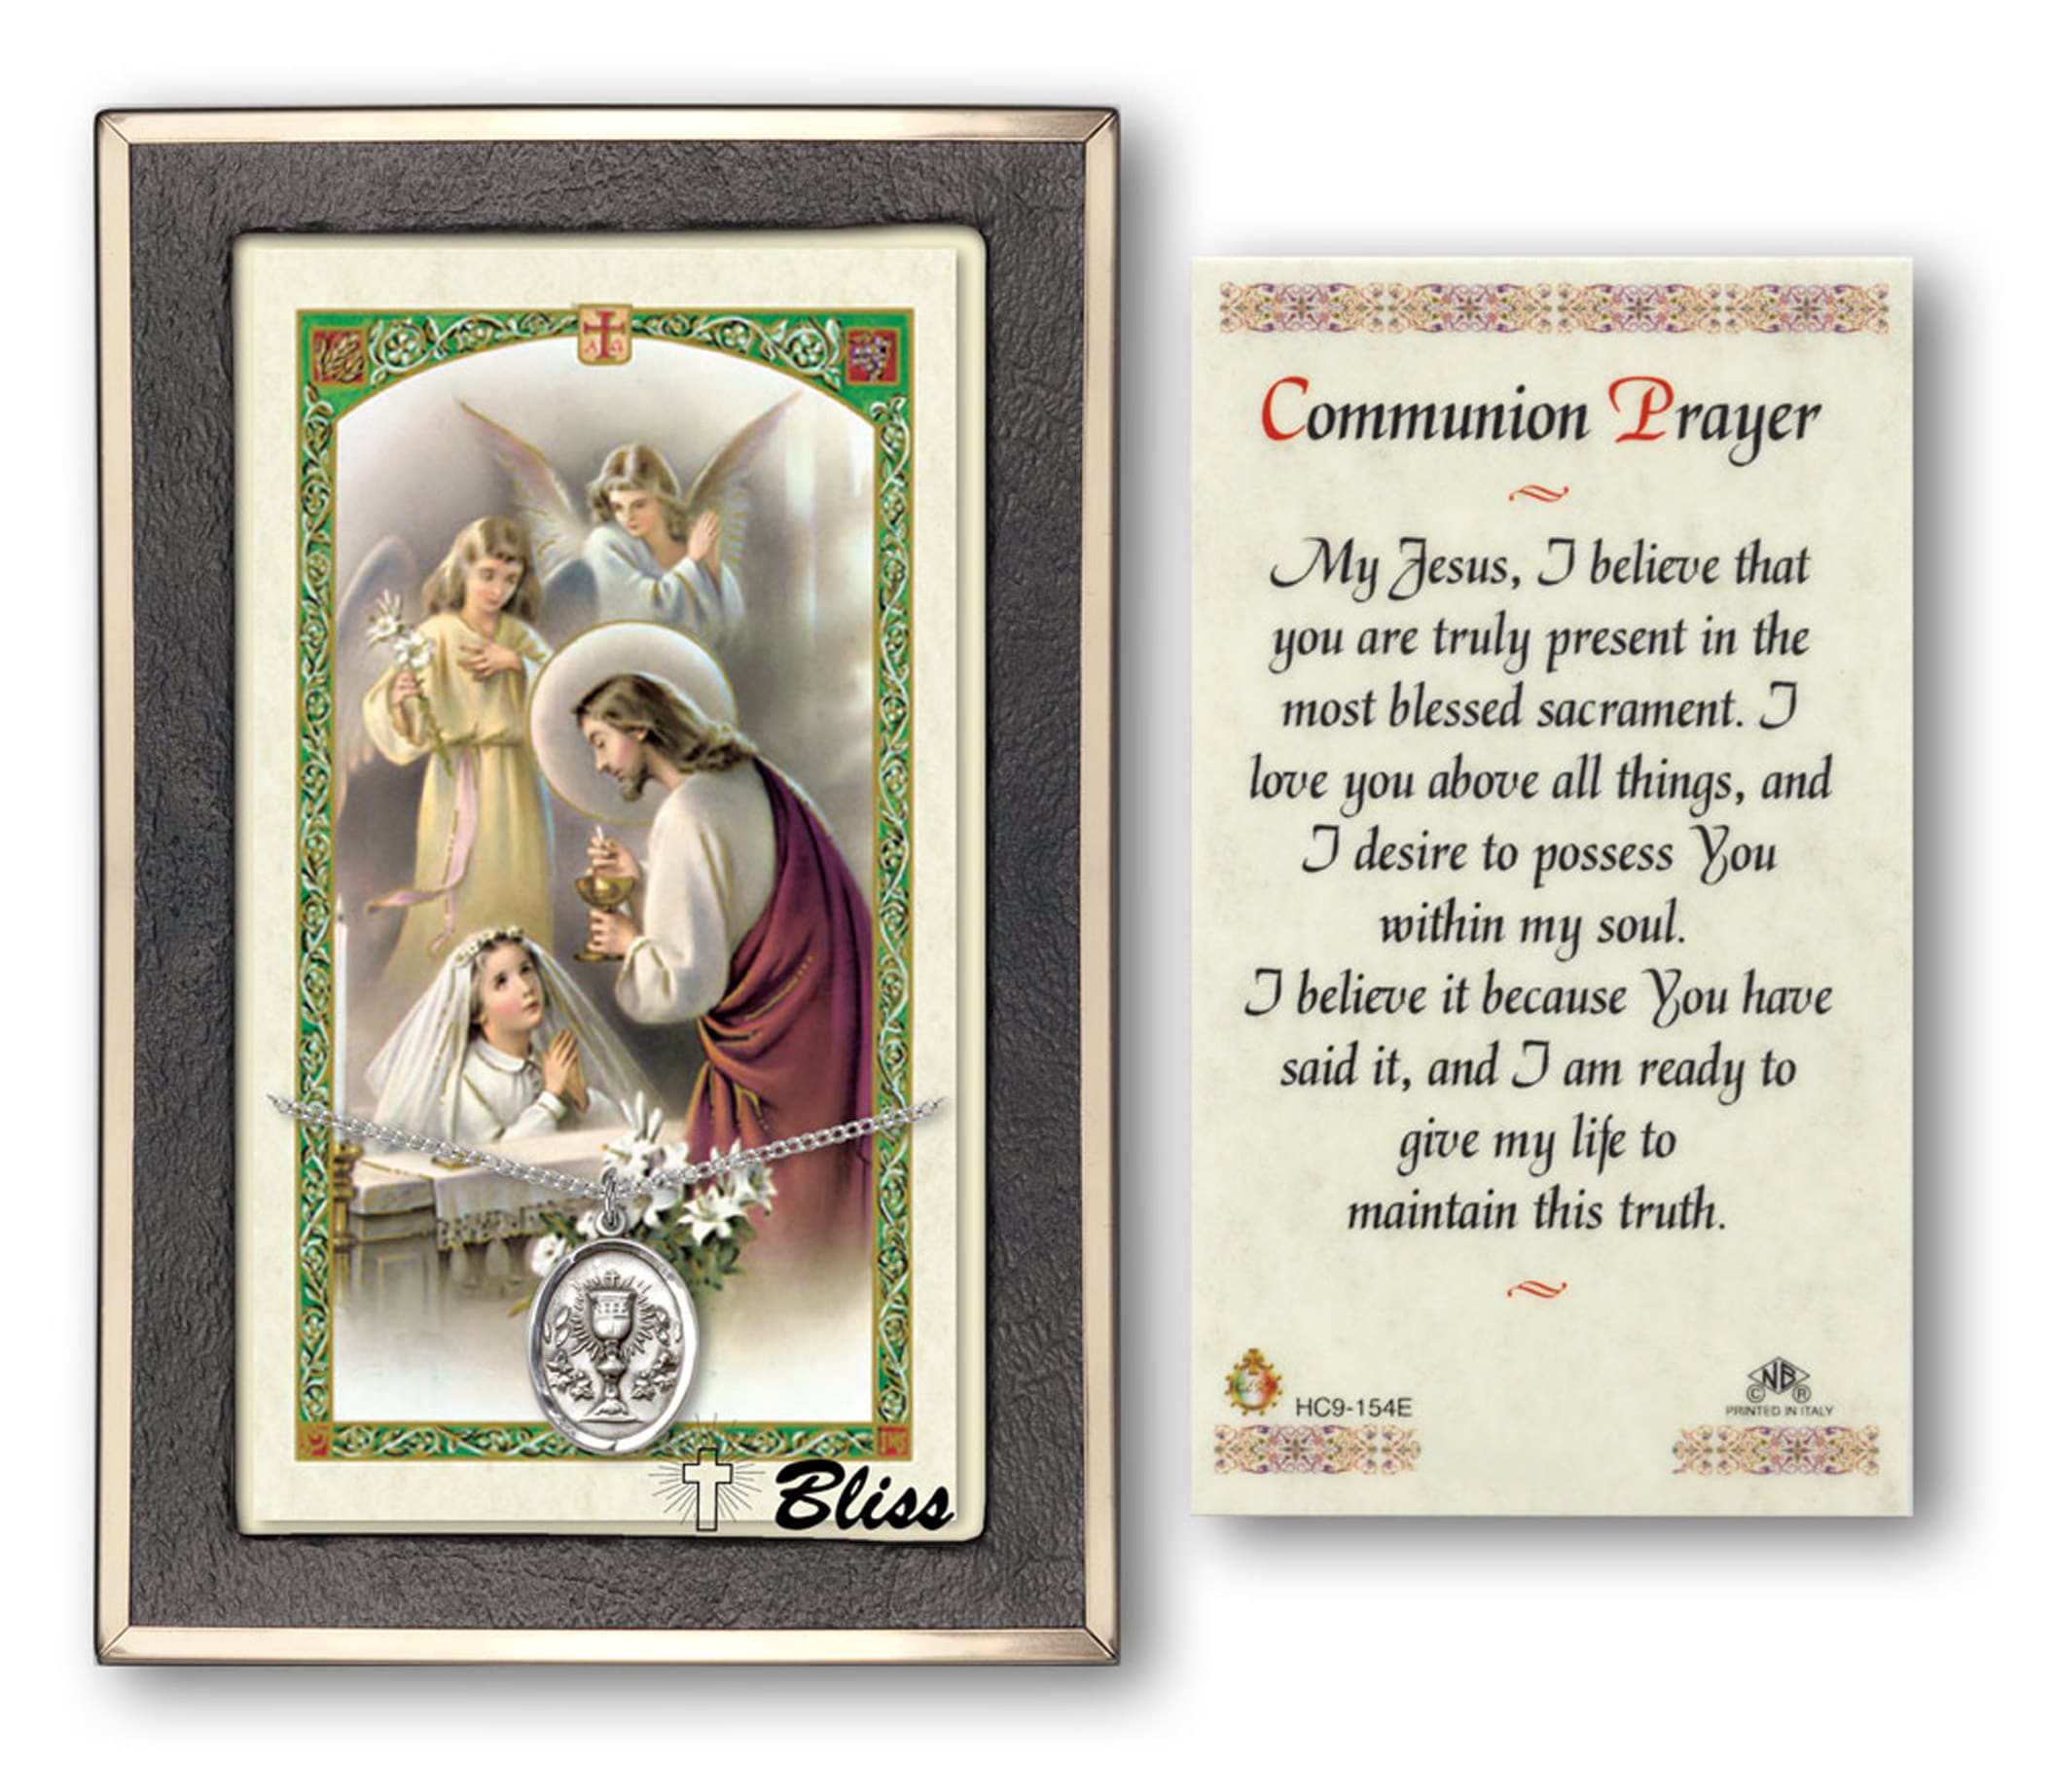 prayer holy communion card catholic cards pendant medal bliss saint religious pewter sterling silver patron medals